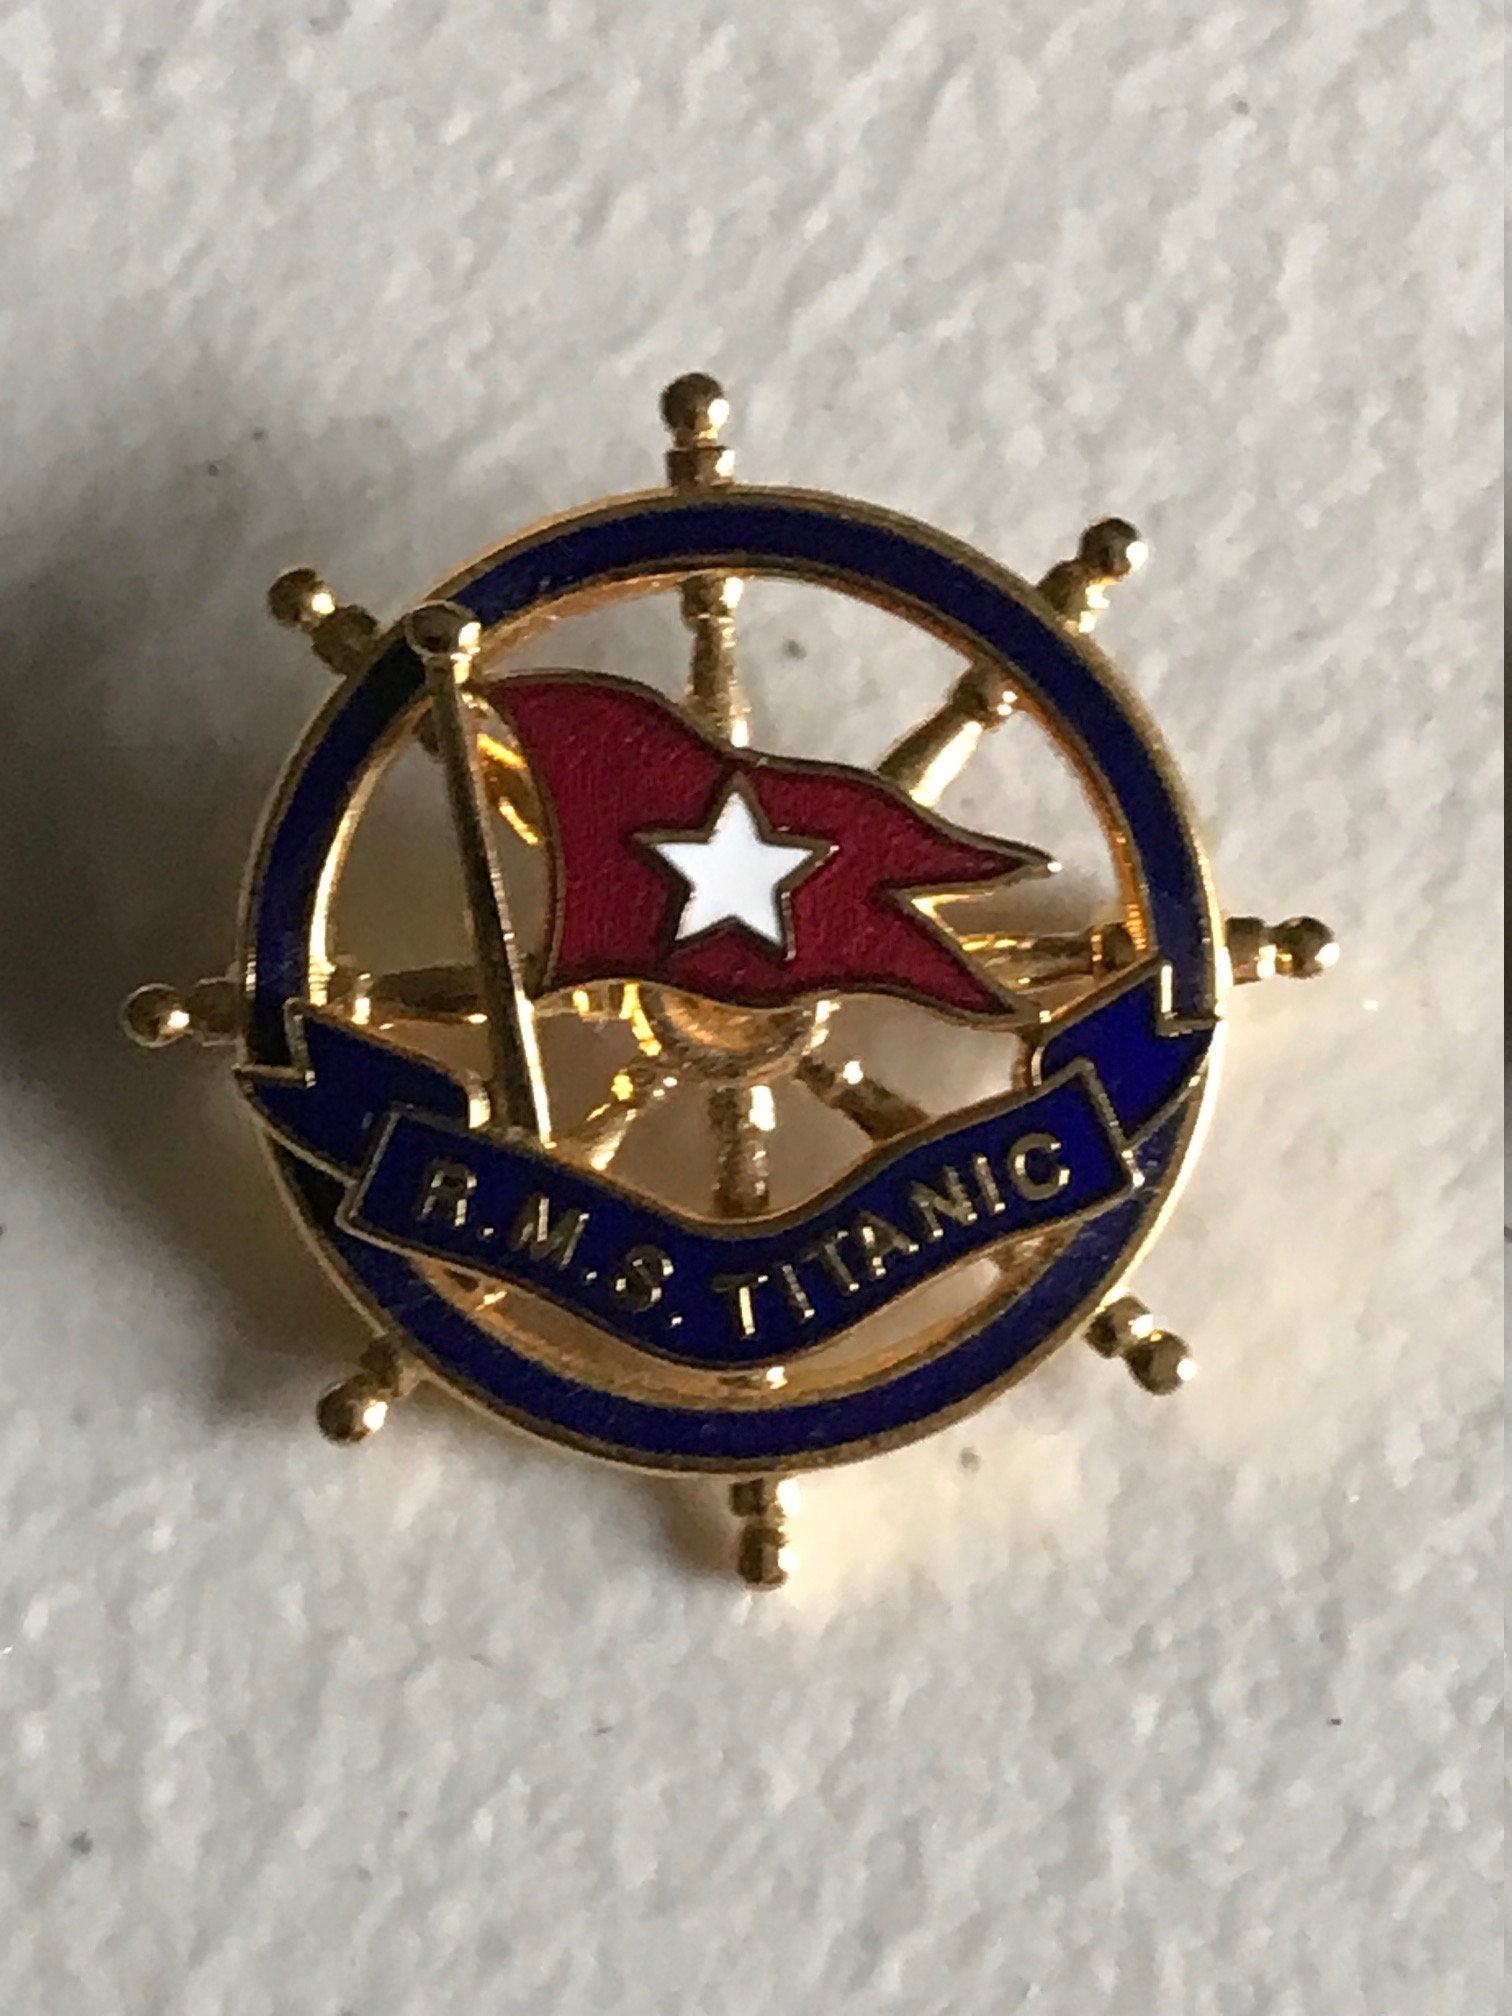 Enamel and Gold Titanic Officer's Lapel Pin,1912 finest quality stunning! 